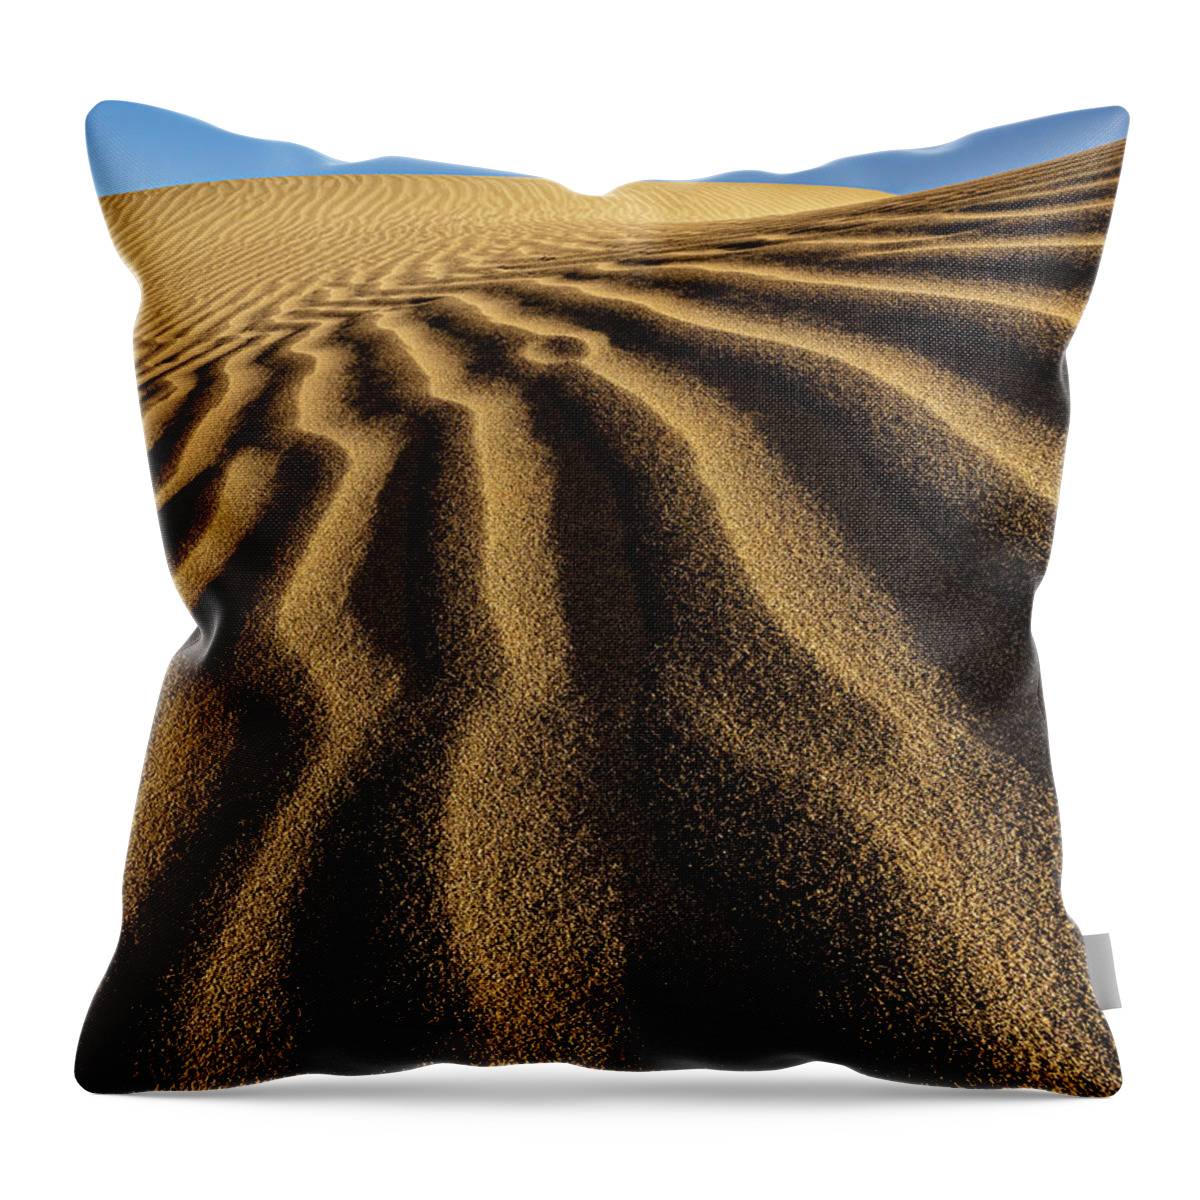 Ripples Throw Pillow featuring the photograph Ripples by David Downs